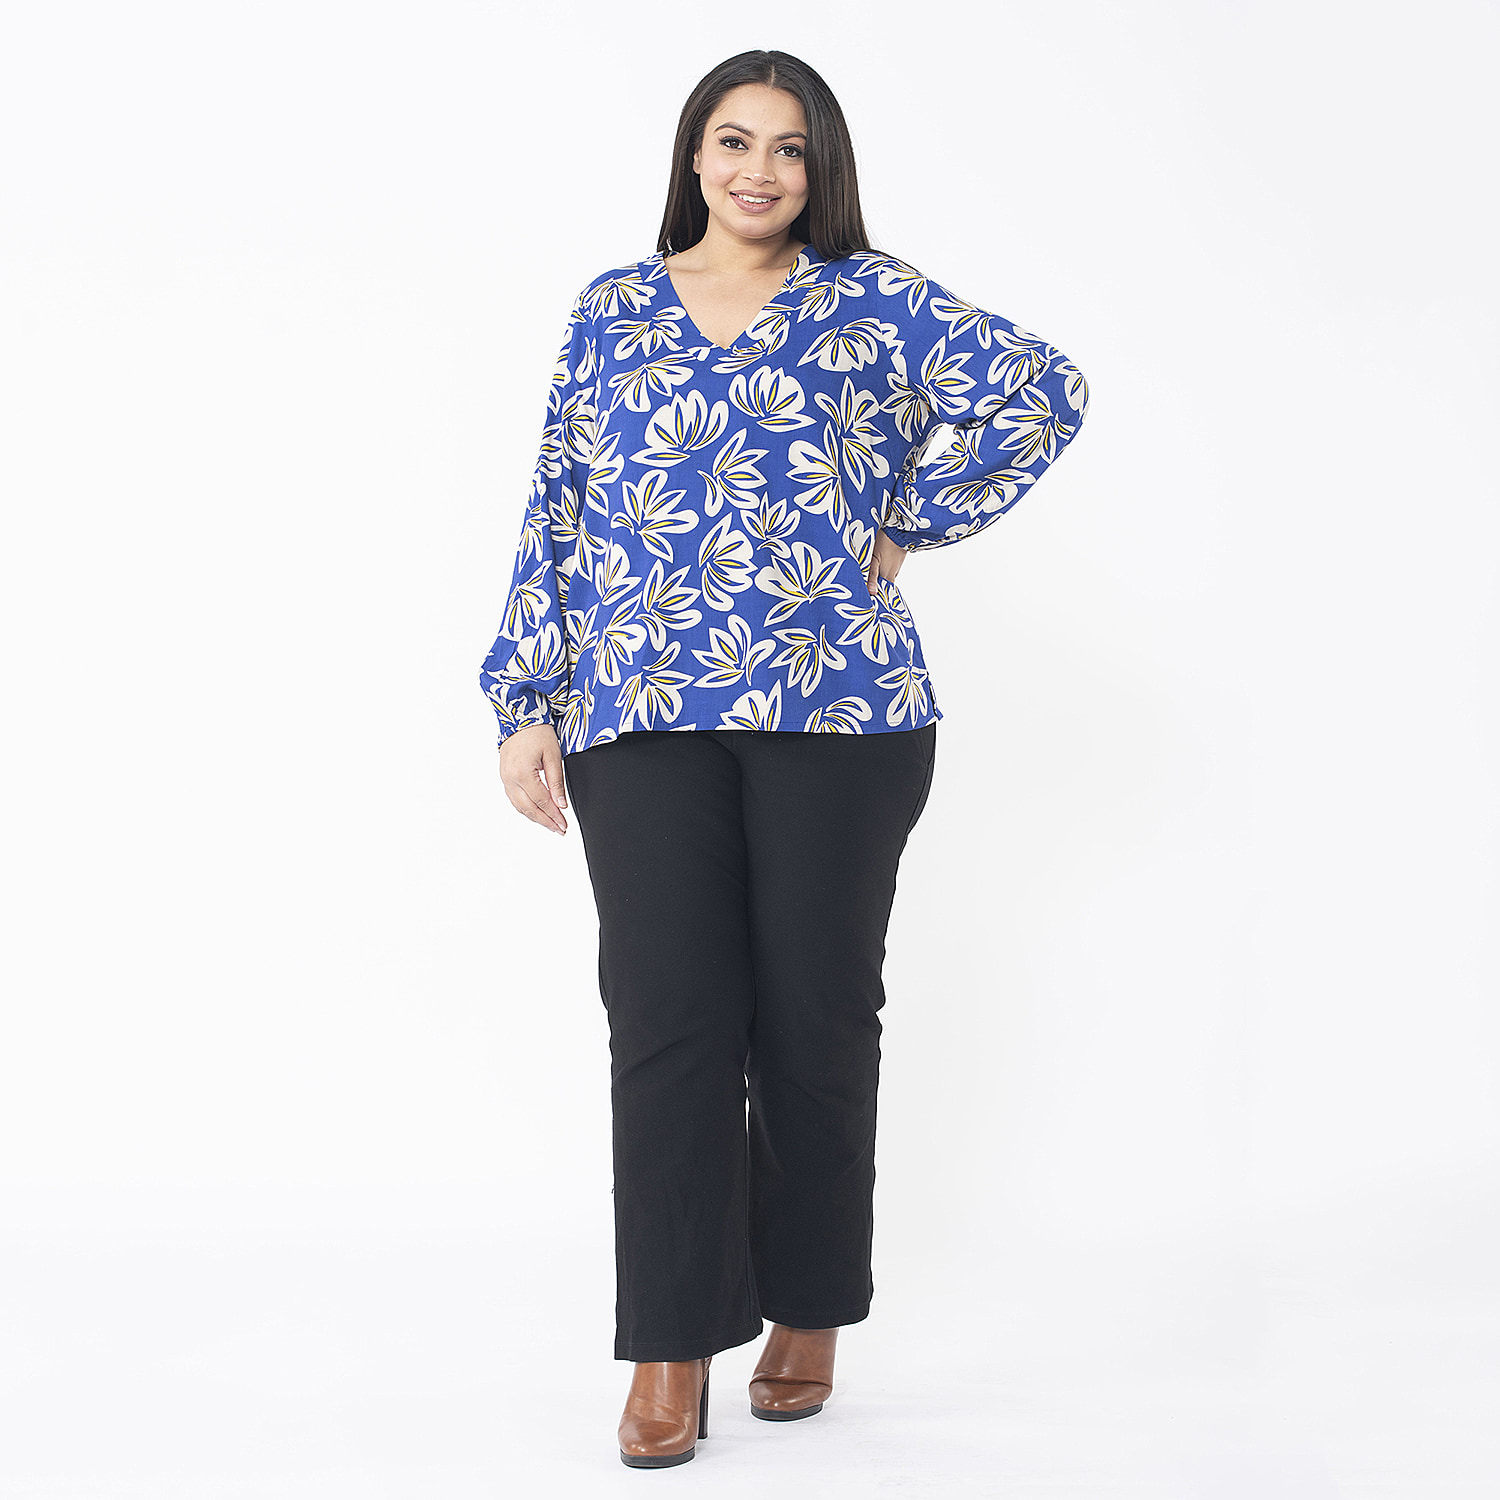 TAMSY 100% Viscose Floral Printed V Neck Full Sleeve Top with Elastic at Cuffs (Size S,08-10) - Navy